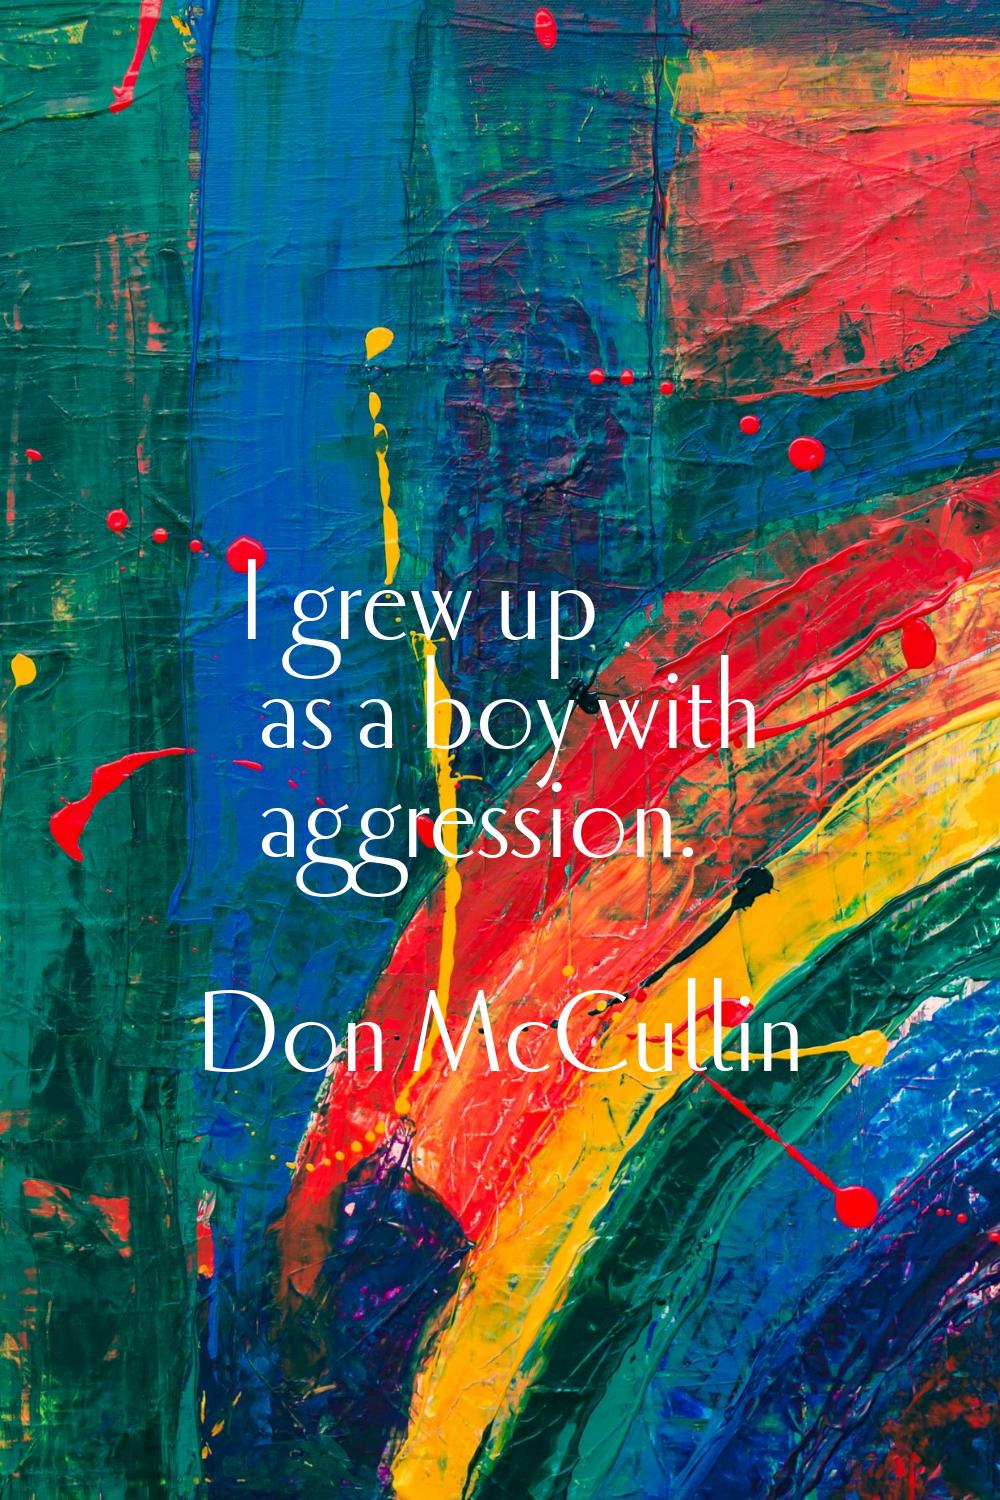 I grew up as a boy with aggression.